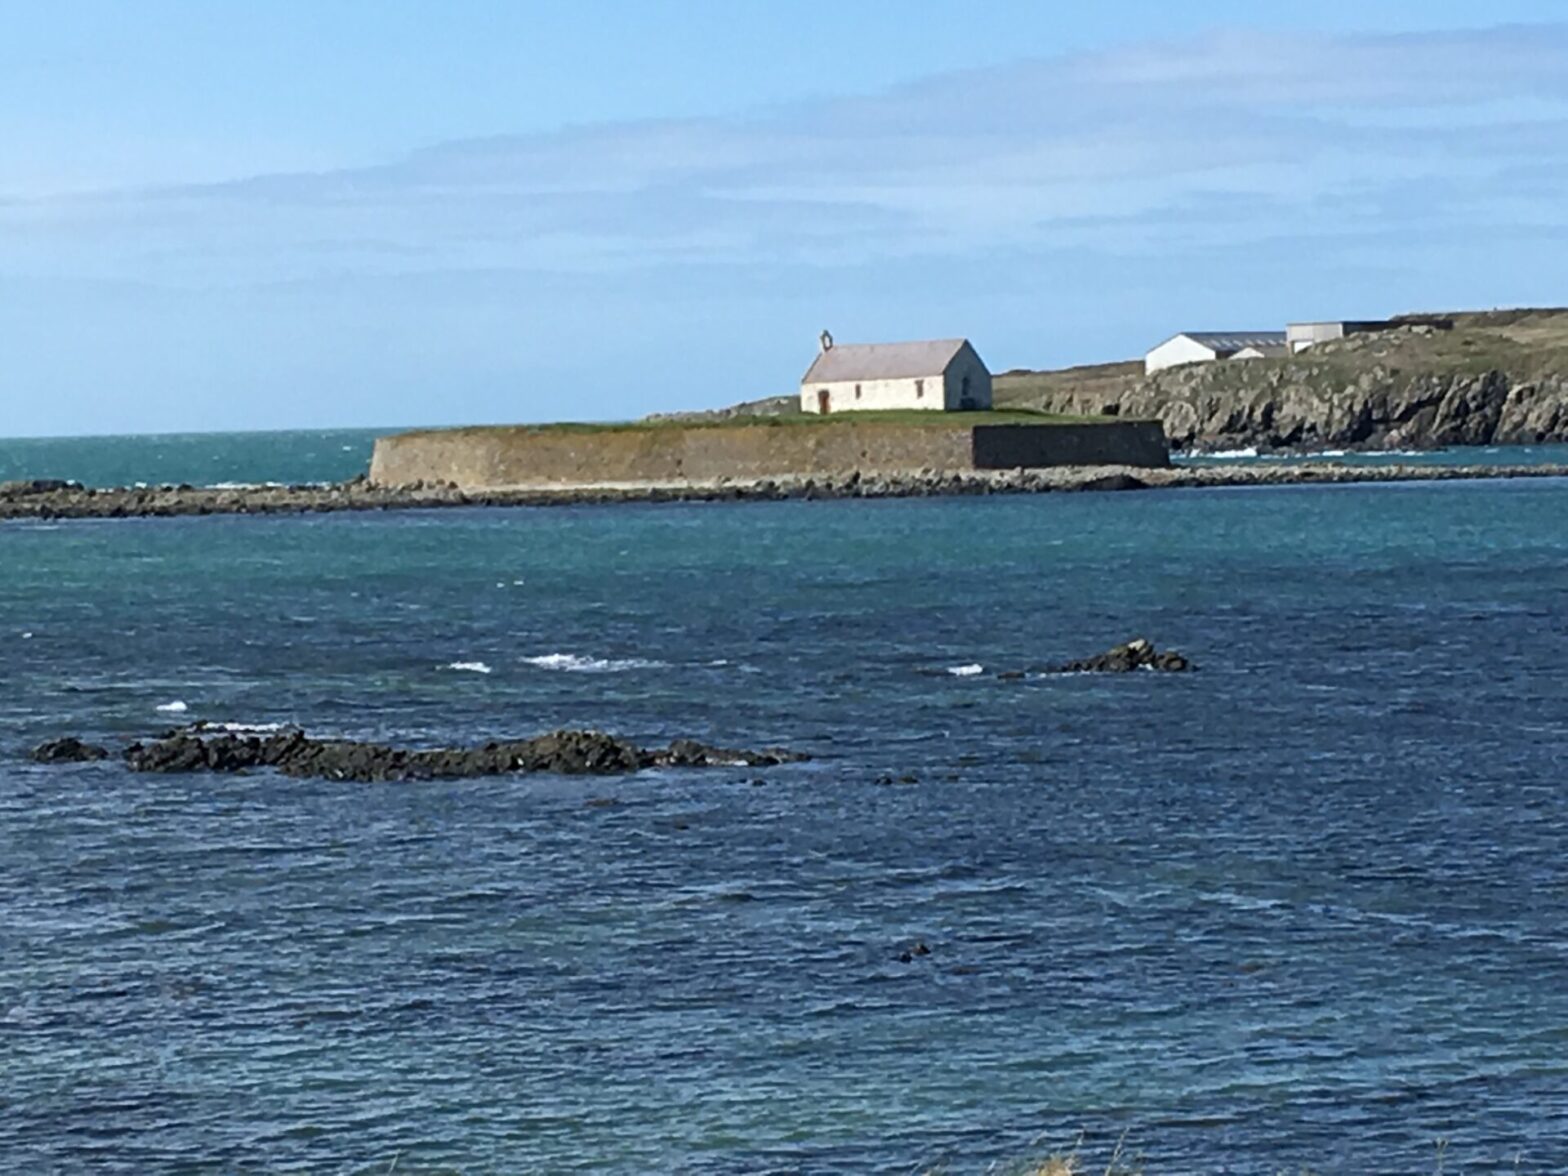 The destination of a bike ride to St Cwyfan's church, which sits on an islet off Anglesey.